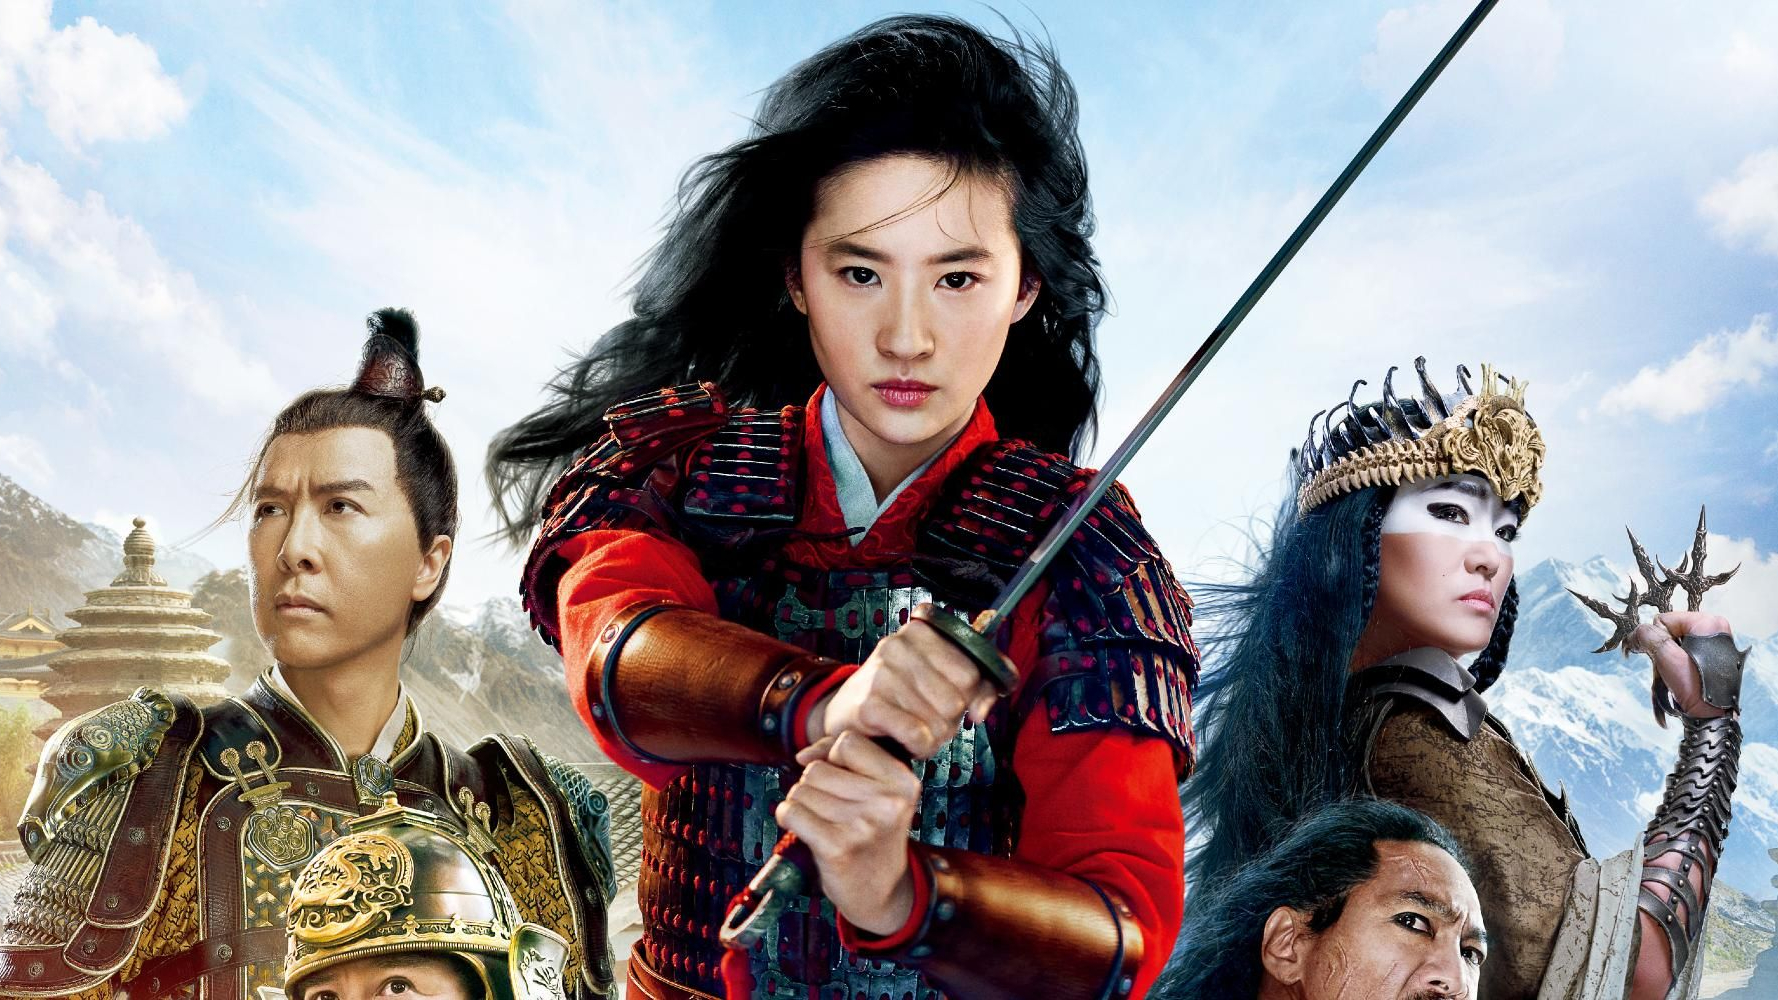 DISNEY LIVE-ACTION REMAKES - All 17 Movies Ranked Worst to Best (w/ Mulan)  